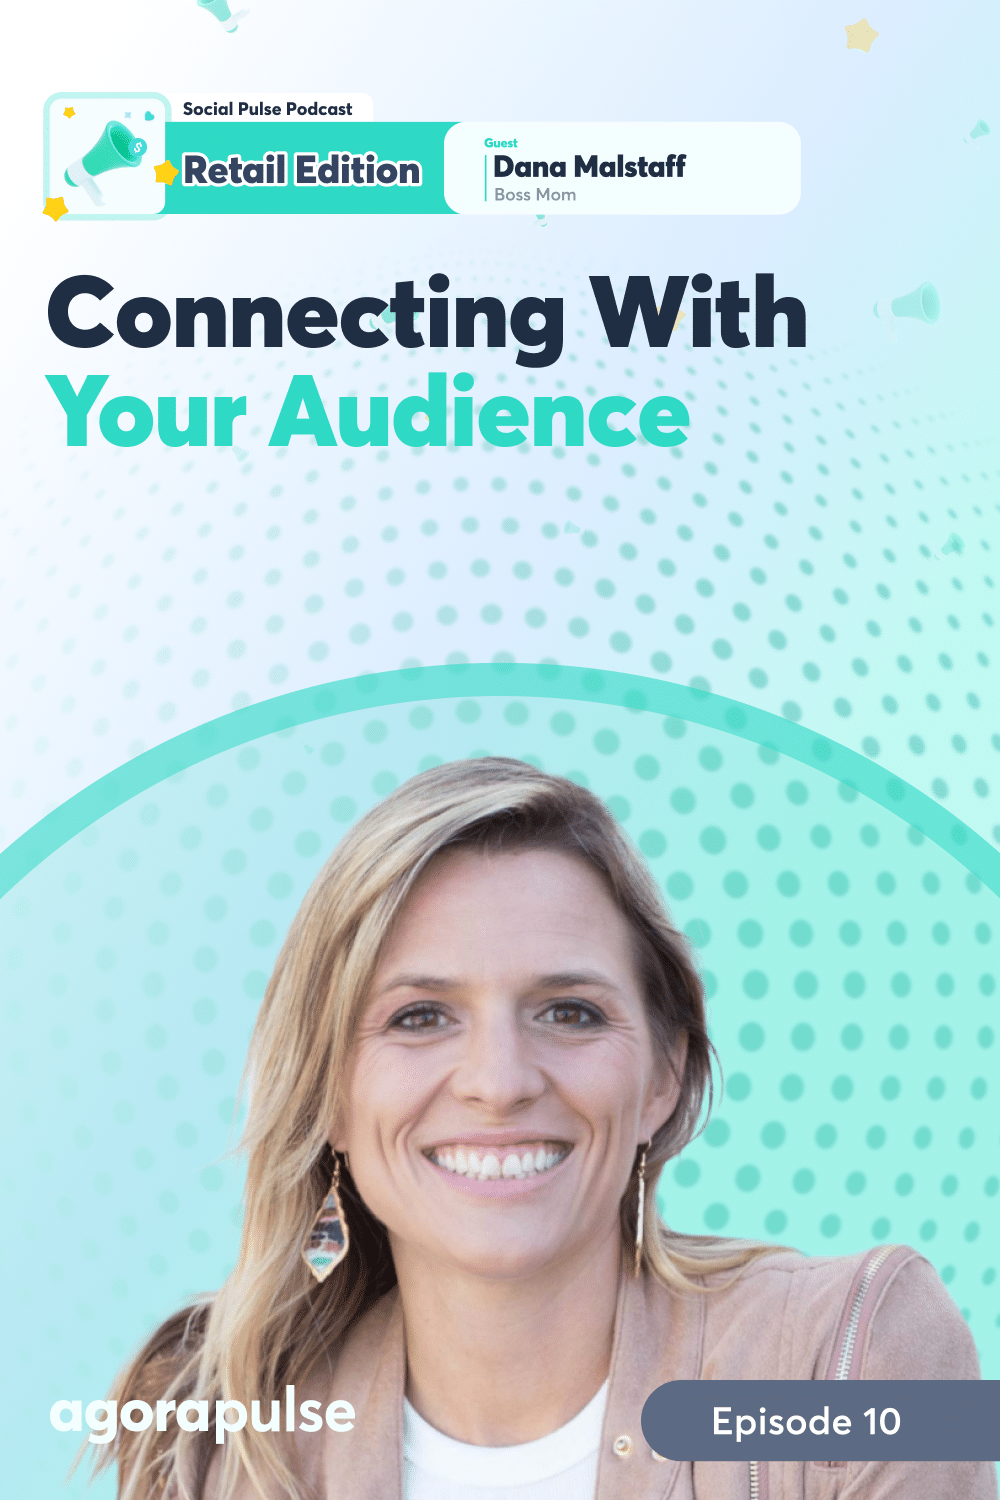 How to Connect With Your Audience